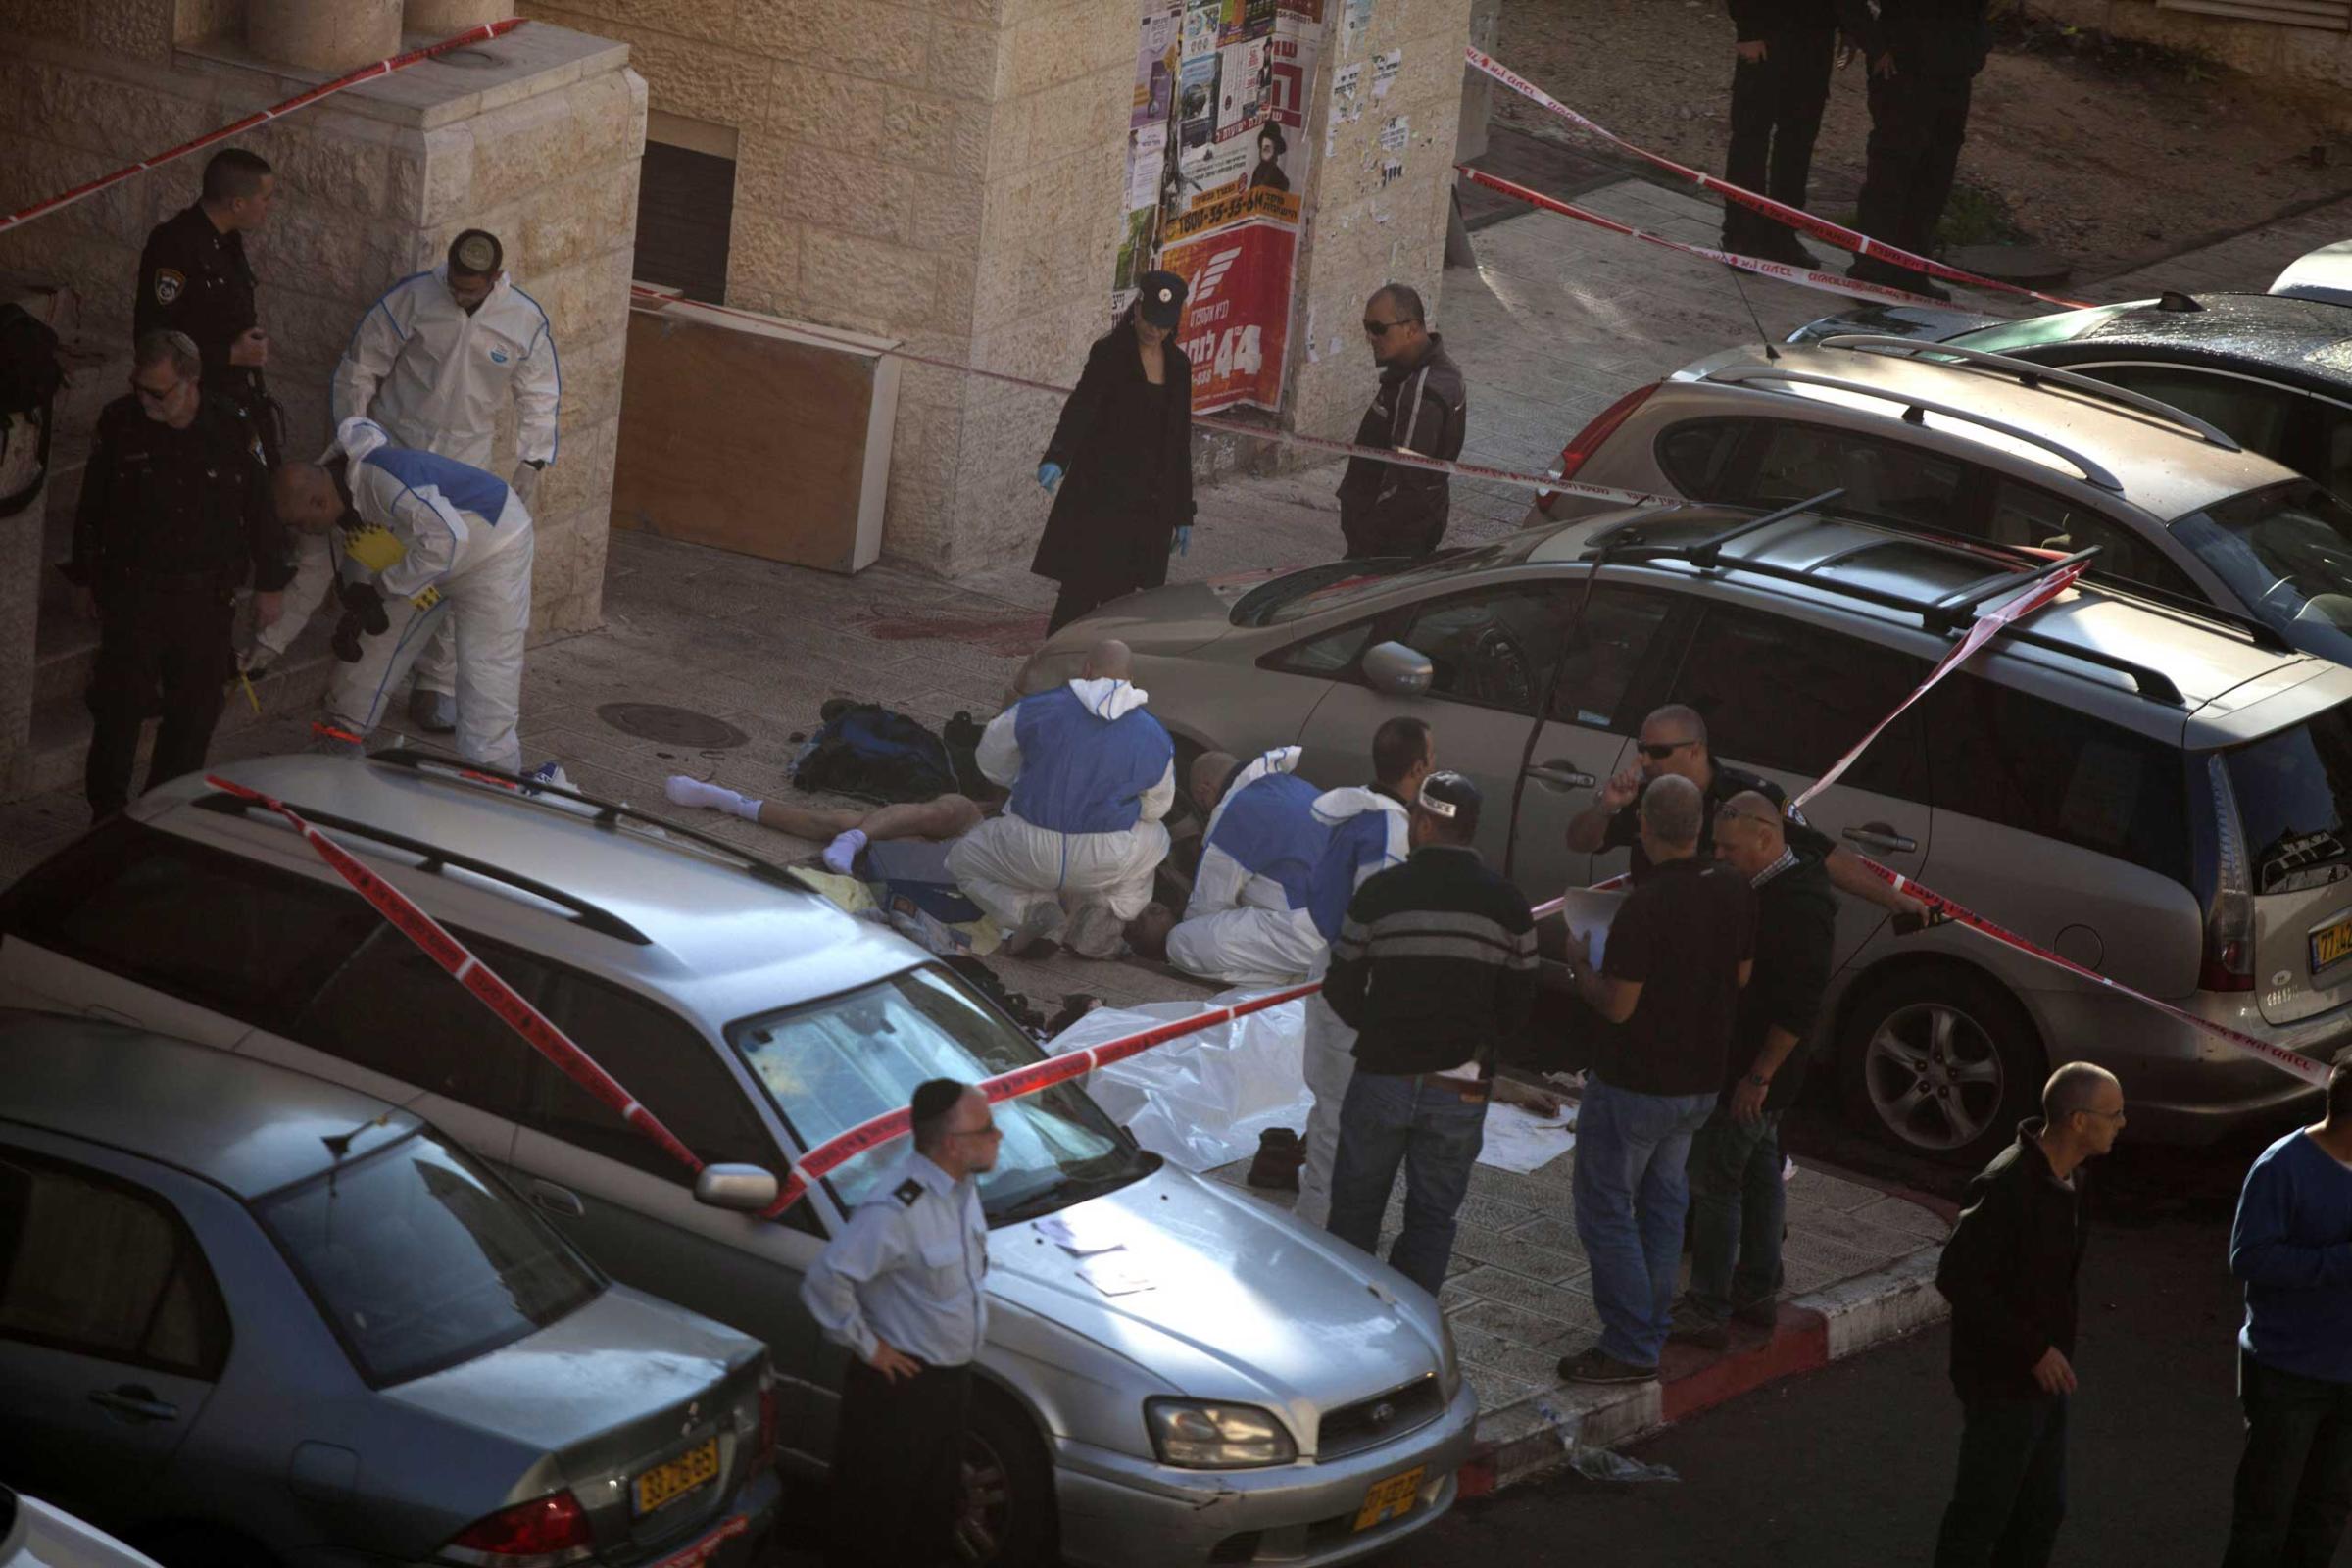 Israeli police crime scene investigators stand near bodies of suspected attackers outside a synagogue on Nov. 18, 2014 in Jerusalem.